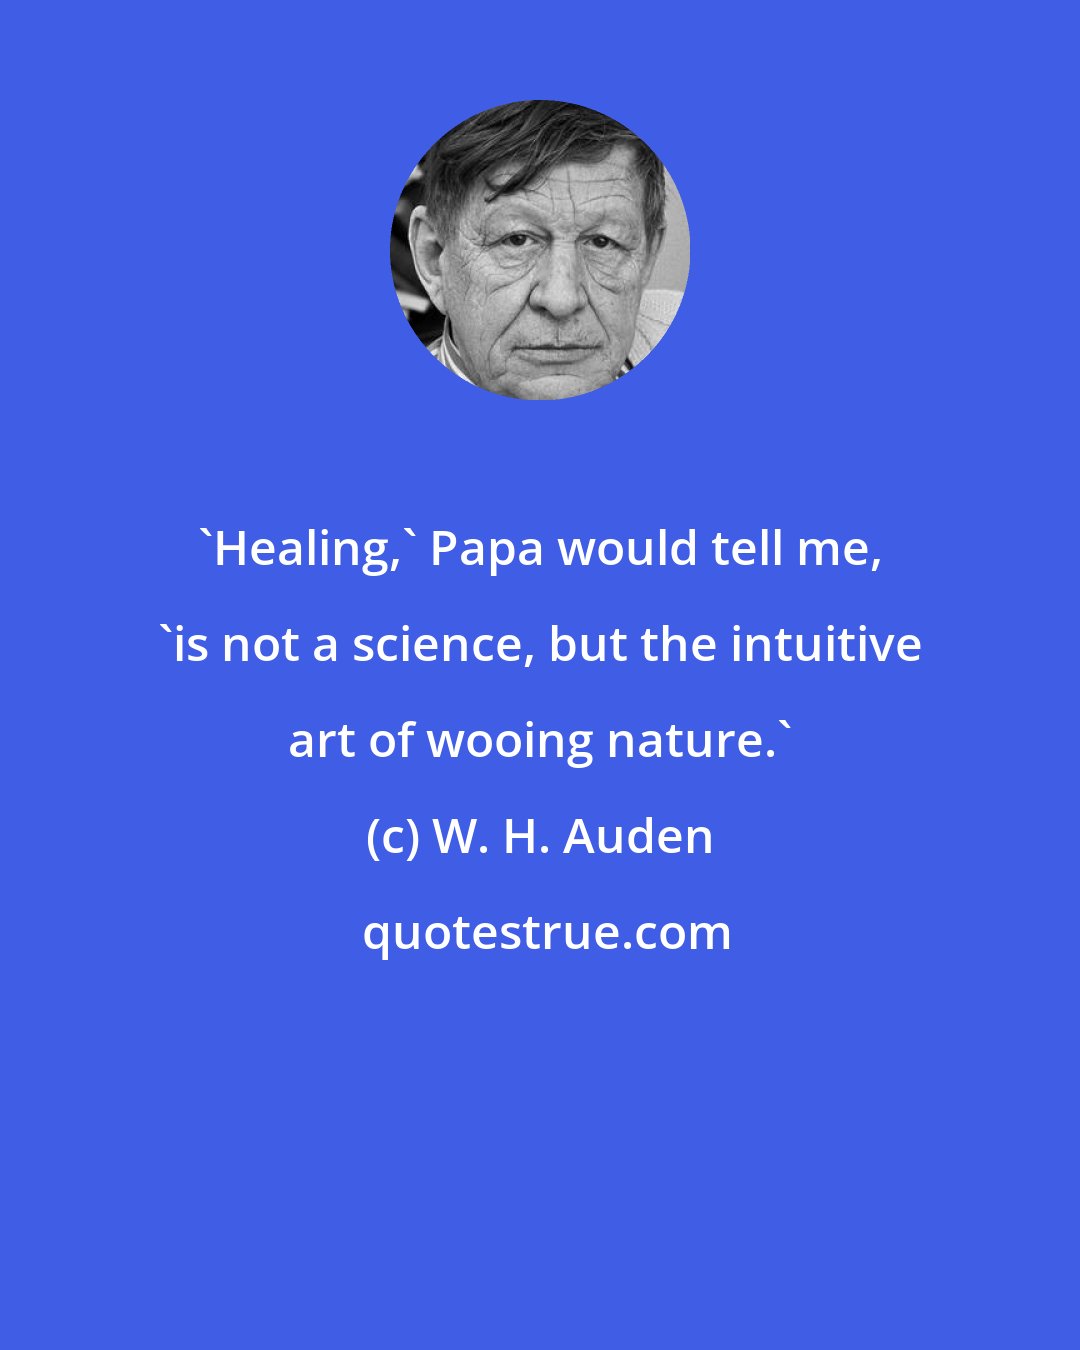 W. H. Auden: 'Healing,' Papa would tell me, 'is not a science, but the intuitive art of wooing nature.'